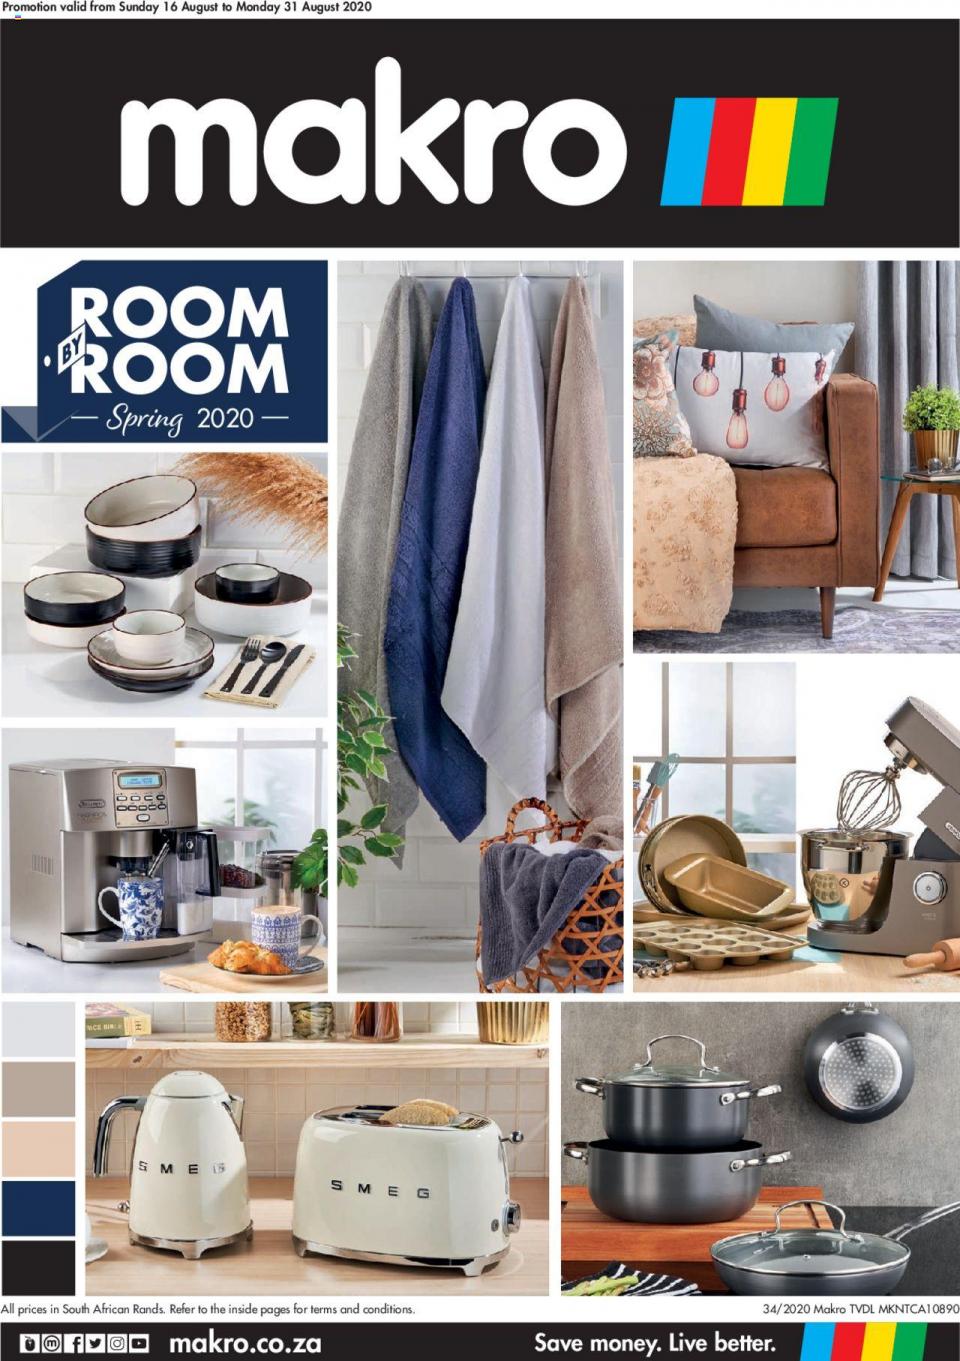 makro specials room by room 16 august 2020